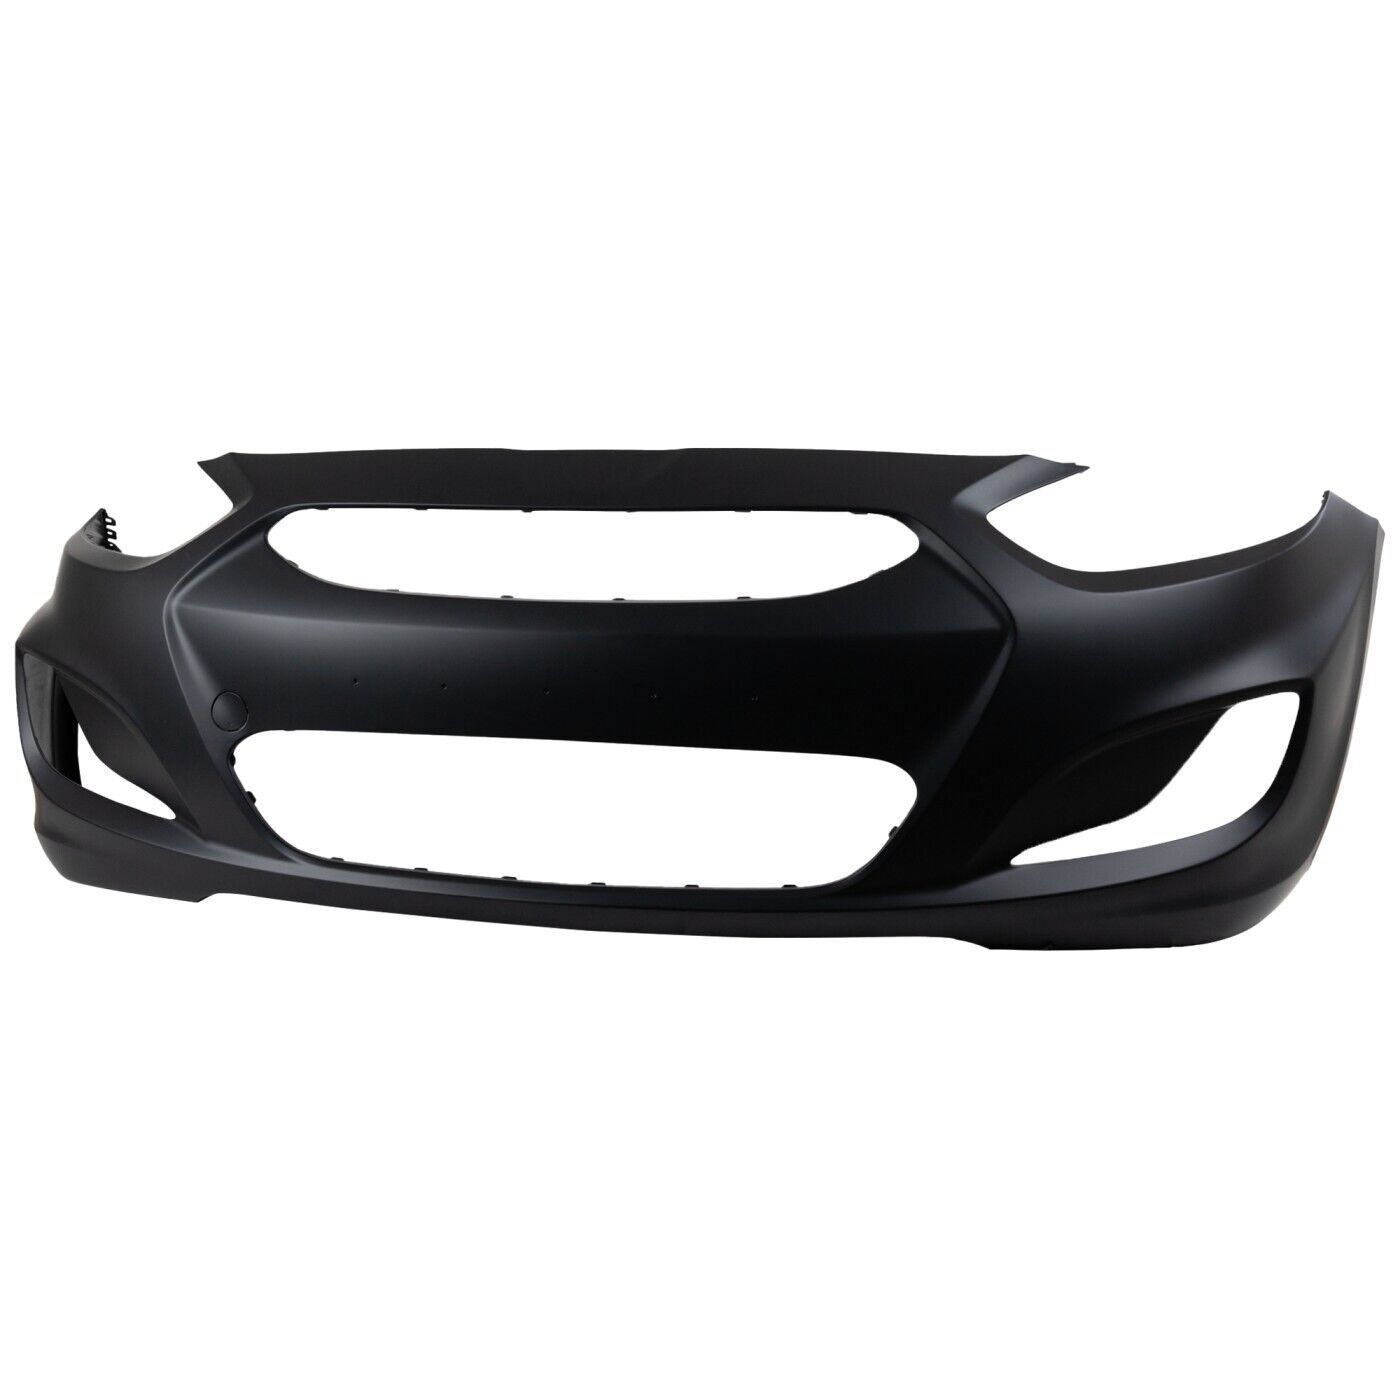 Primed Front Bumper Cover For 2012-2014 Hyundai Accent Sedan/Hatchback HY1000188